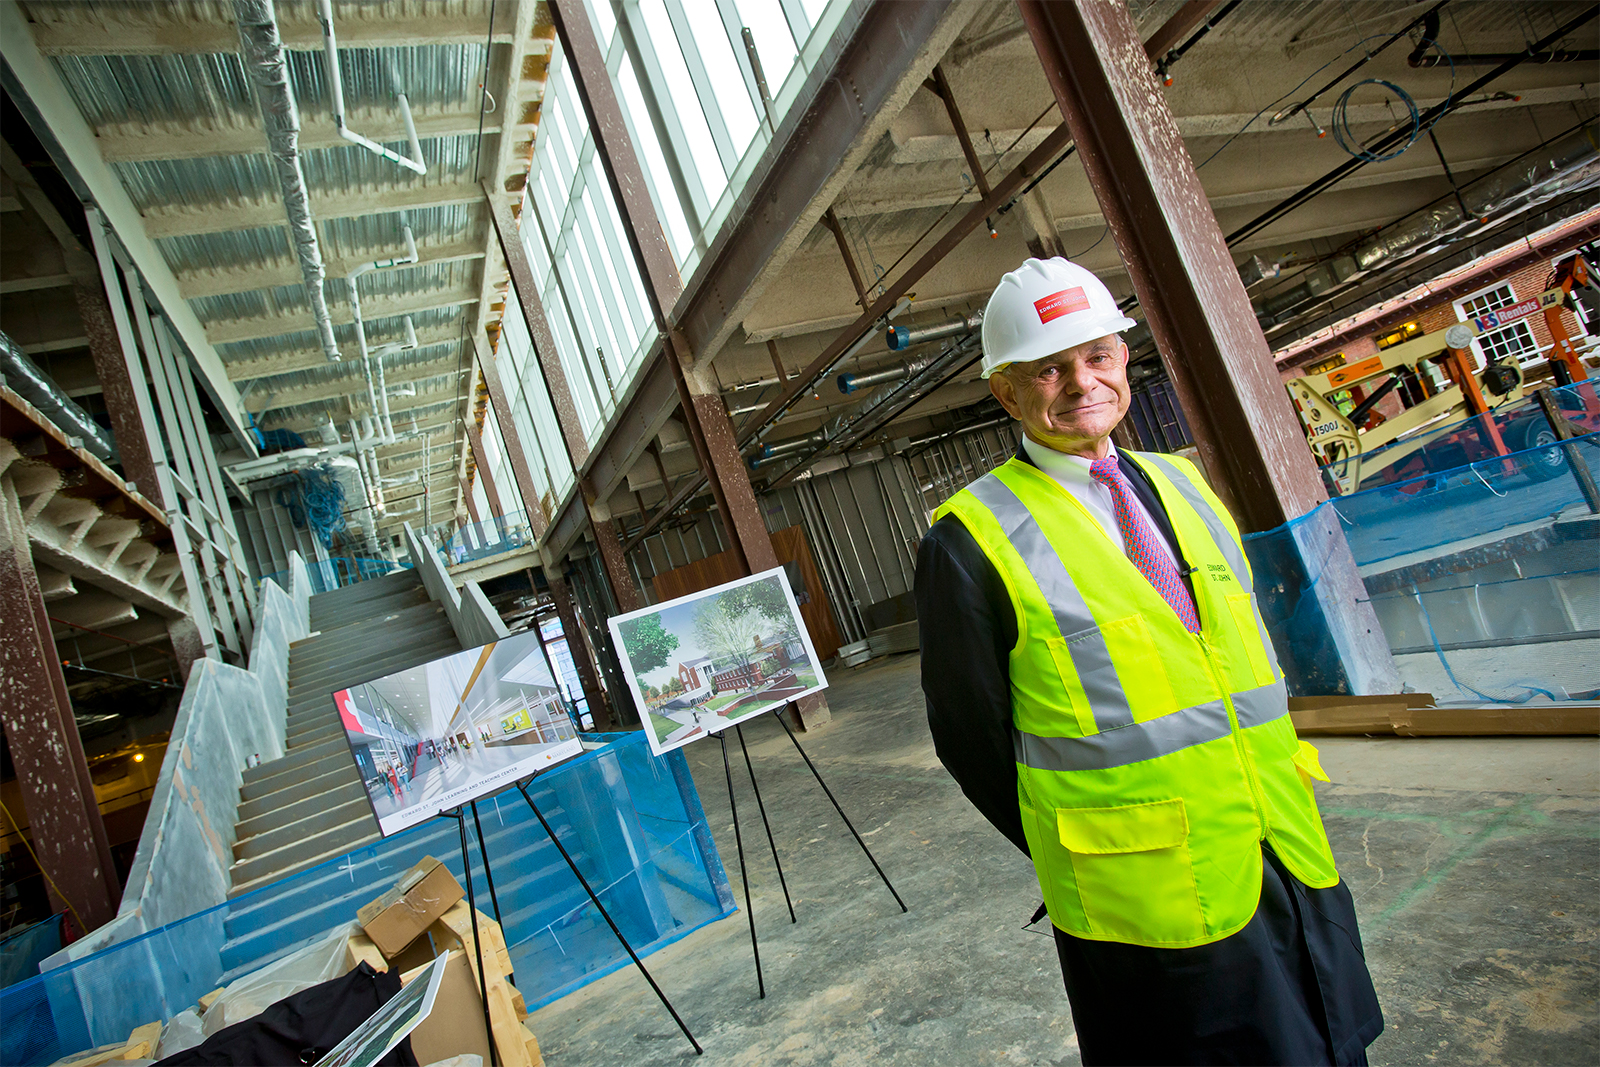 Edward St. John during a hard hat tour of the Edward St. John Learning and Teaching Center at the University of Maryland